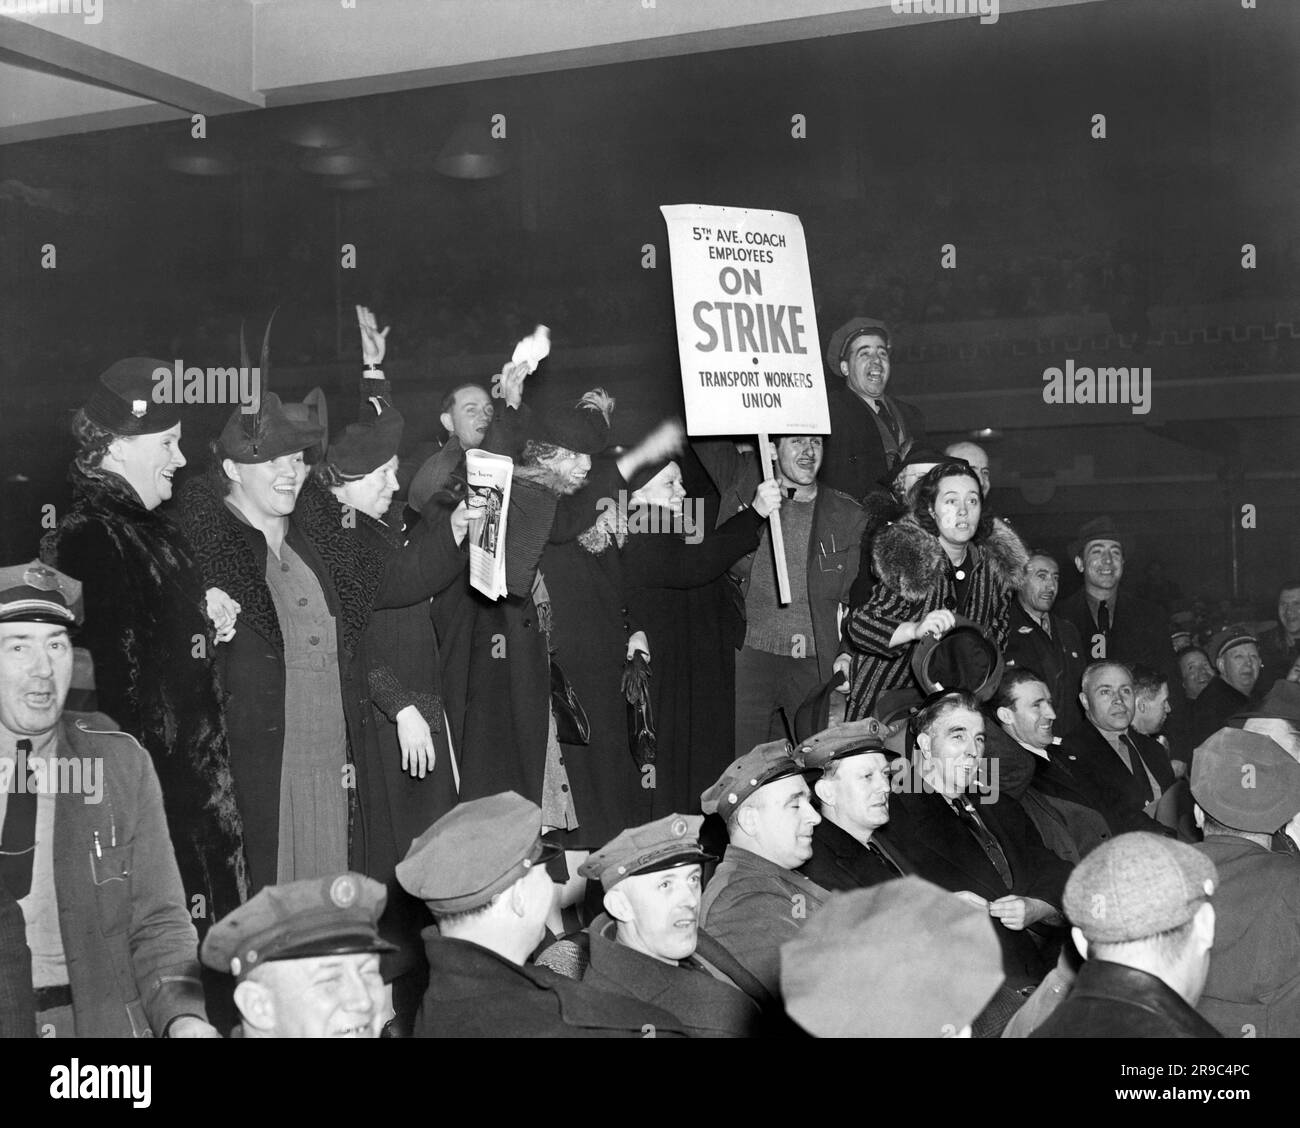 New York, New York:   1937 Fifth Avenue coach employees of the Transit Workers Union at a bus strike union meeting. Stock Photo